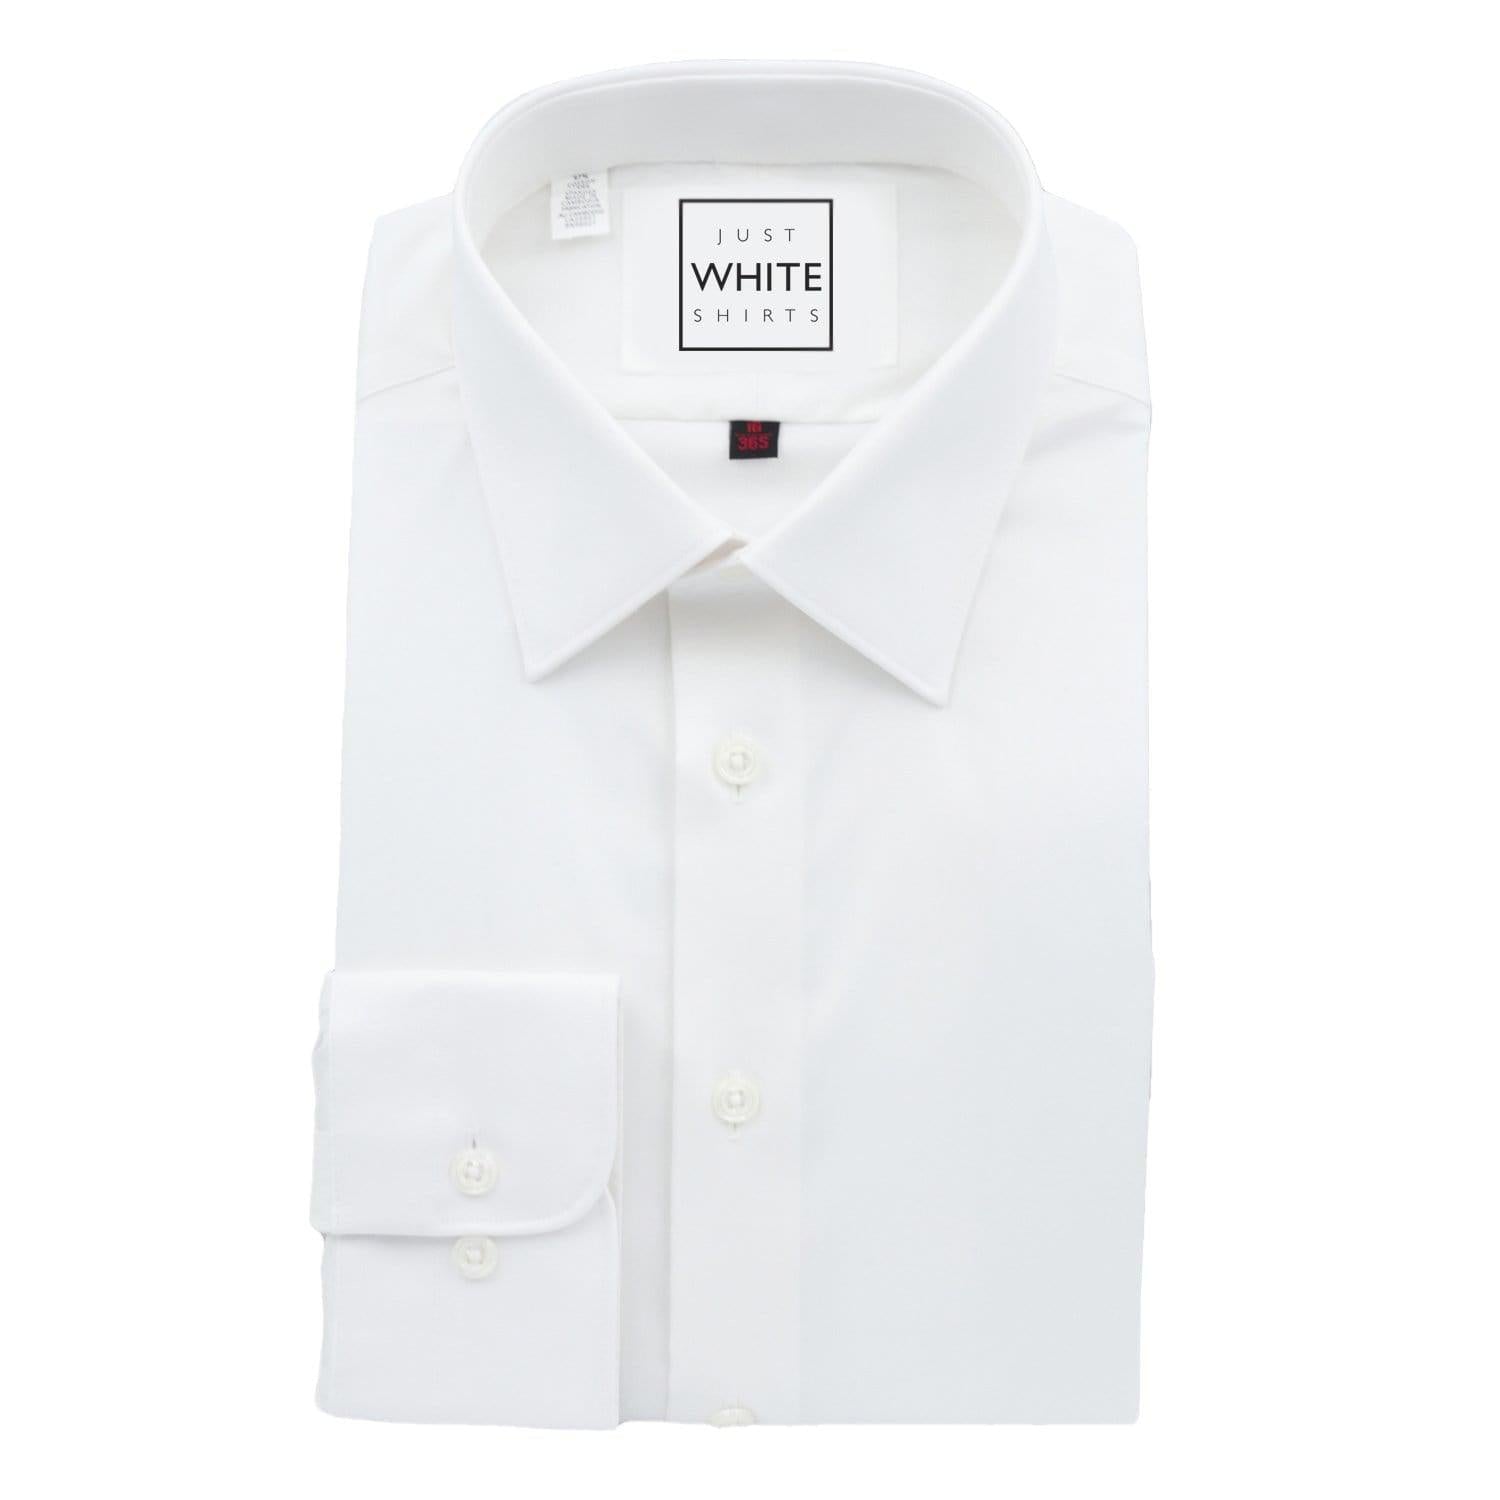 White Egyptian Cotton Non Iron Dress Shirt, Modified Collar and Adjustable Button Cuffs - Just White Shirts